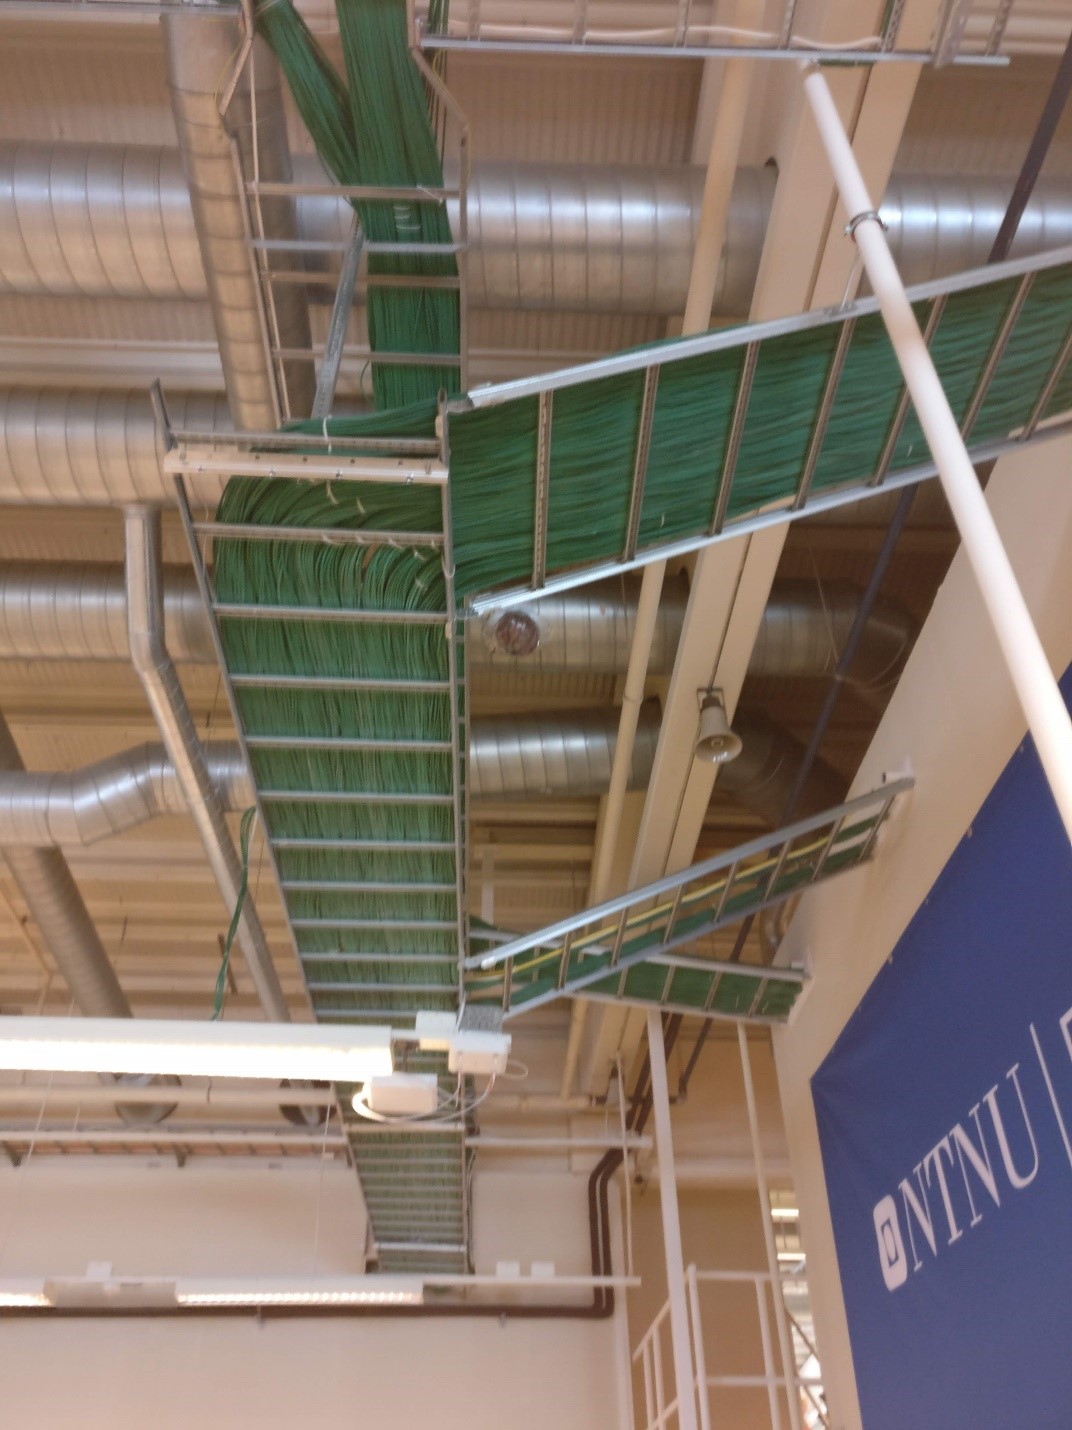 Photograph of cabling and pipes on the ceiling of the NTNU Eksamen (exam) building 